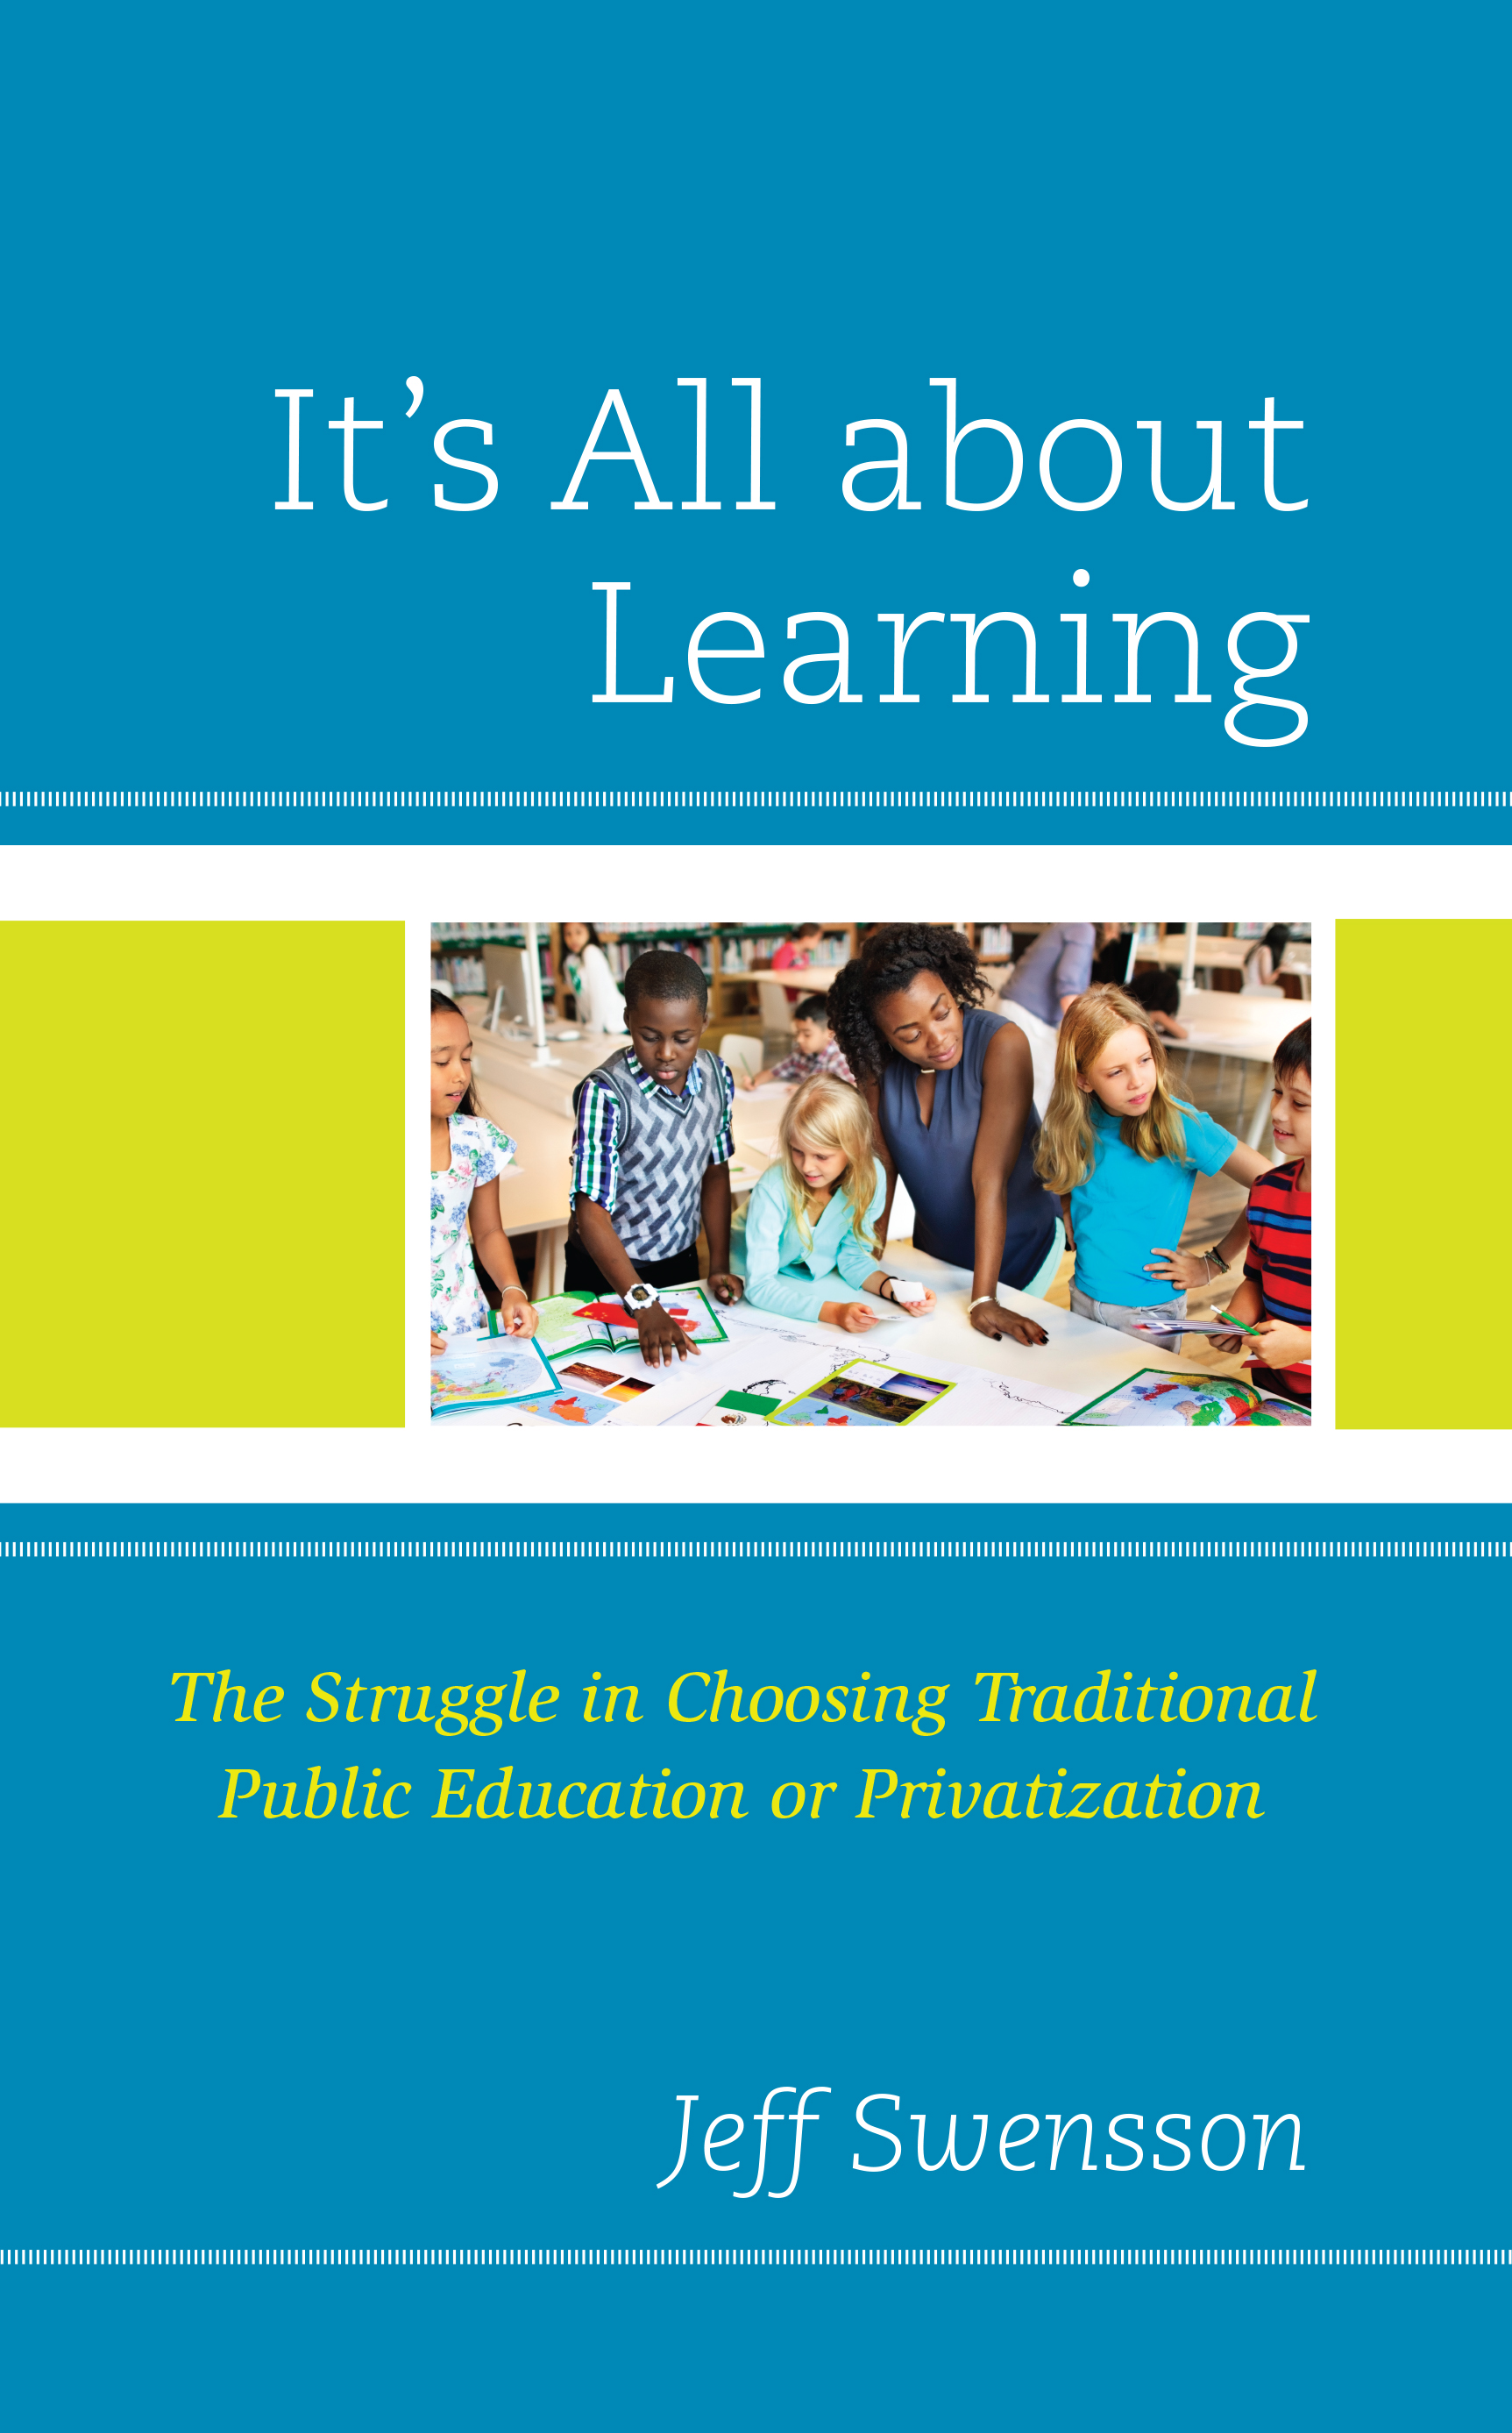 It’s All about Learning: The Struggle in Choosing Traditional Public Education or Privatization